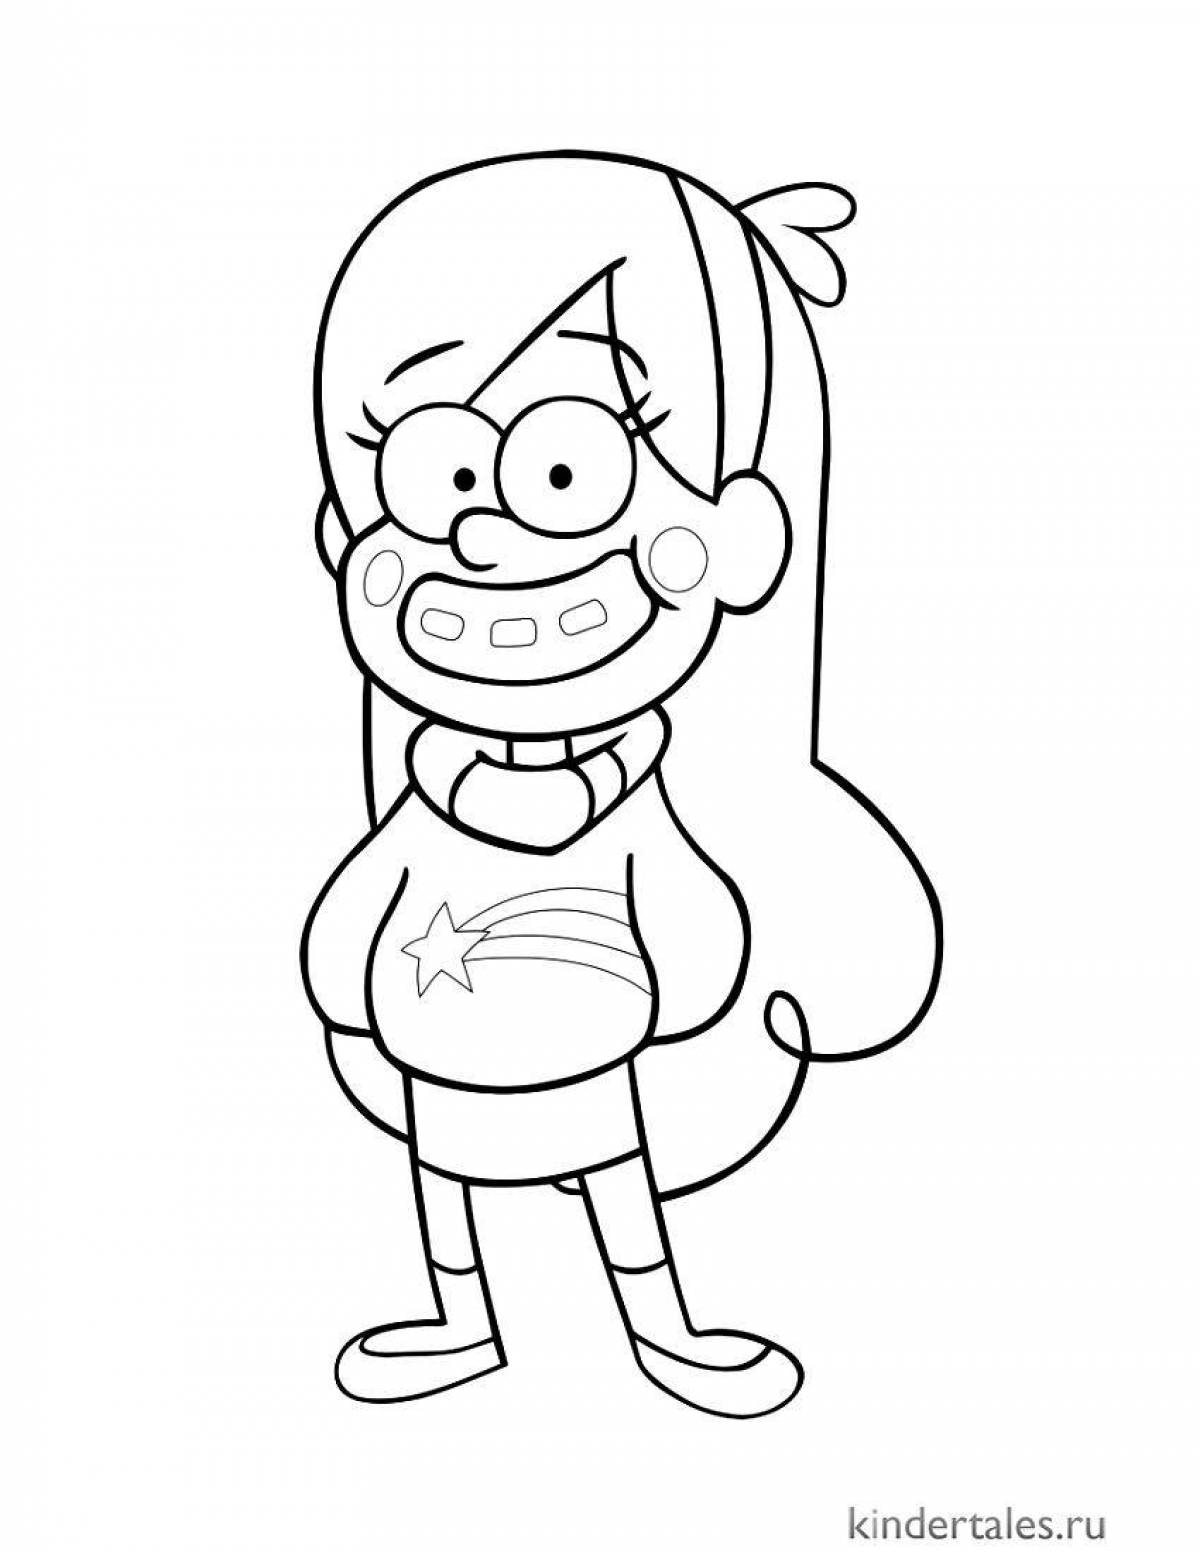 Glowing dipper pine coloring page